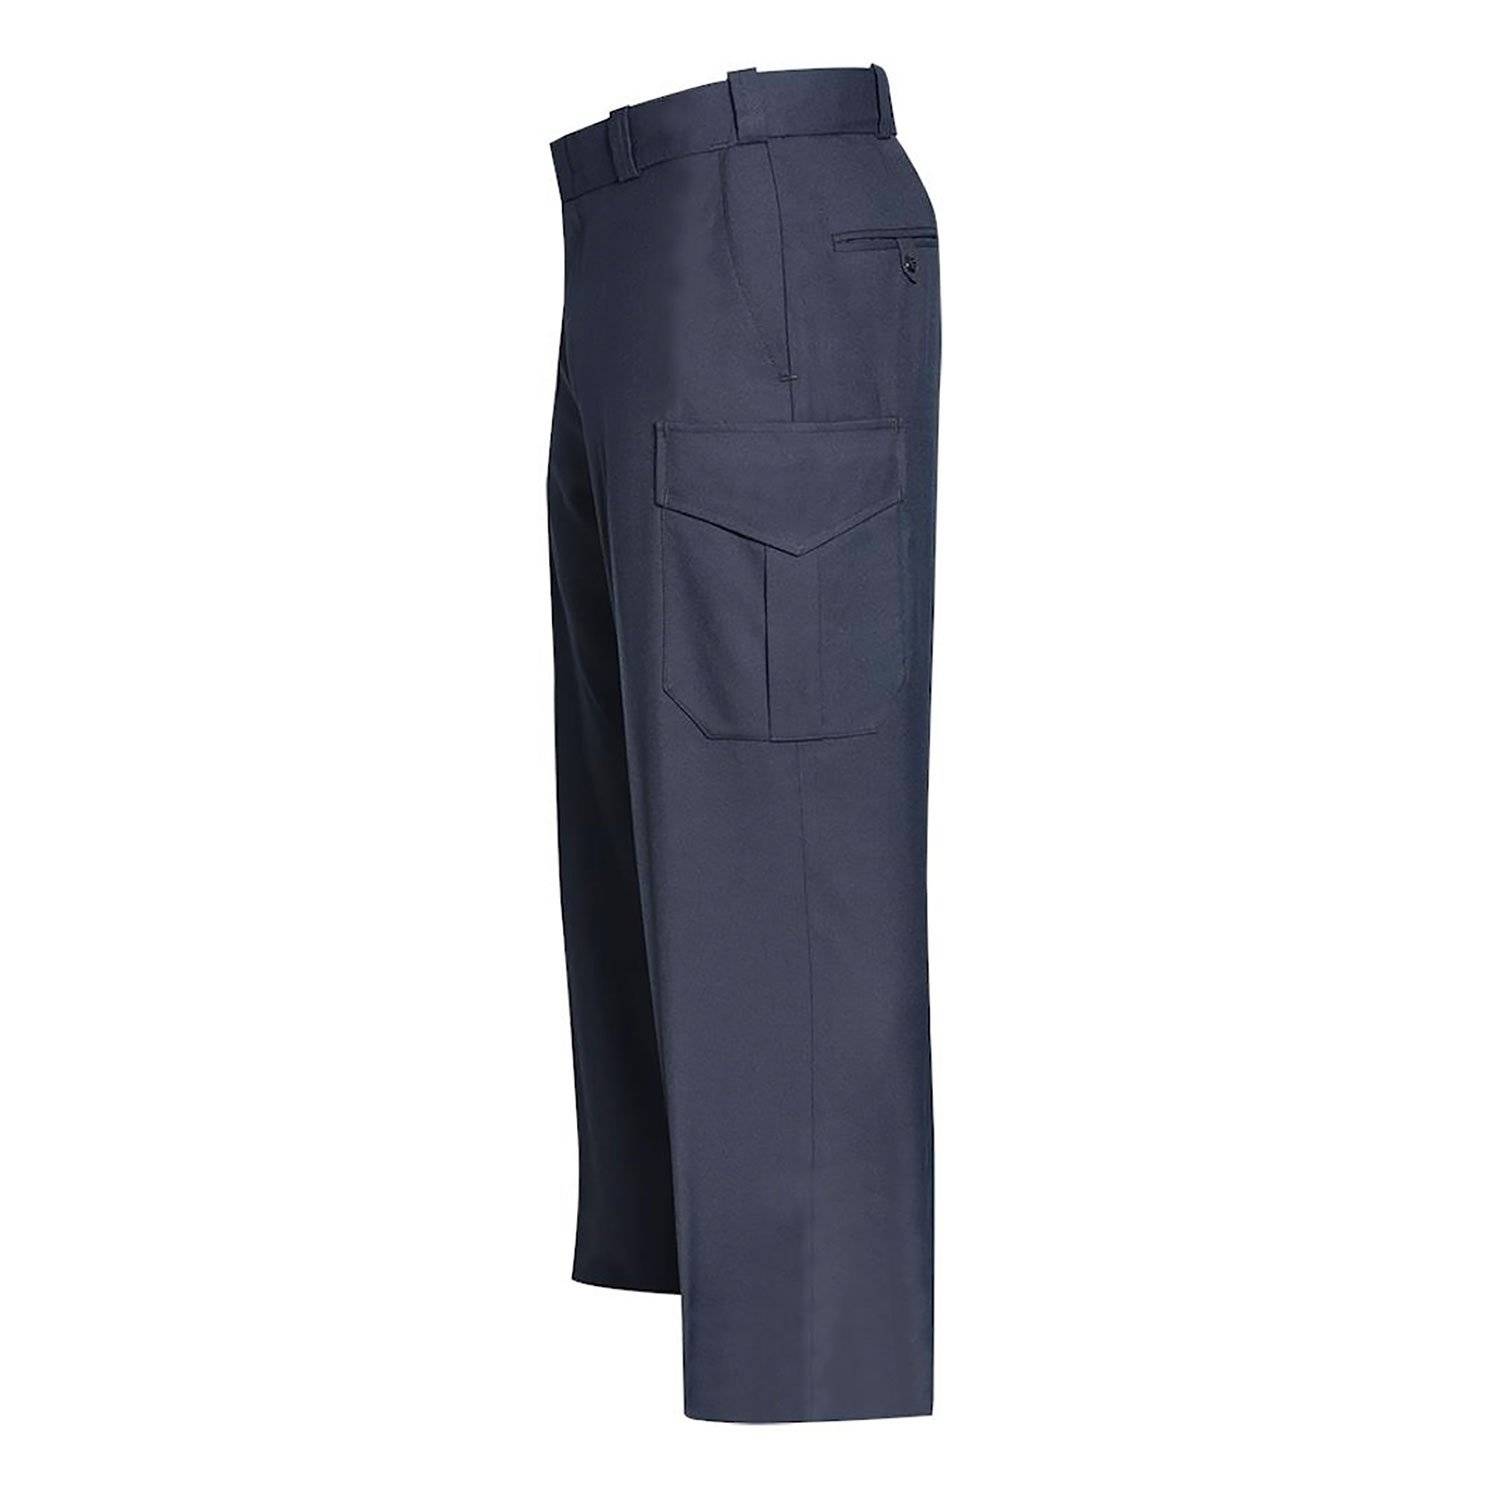 Flying Cross Women's Wool and Polyester Justice Pants